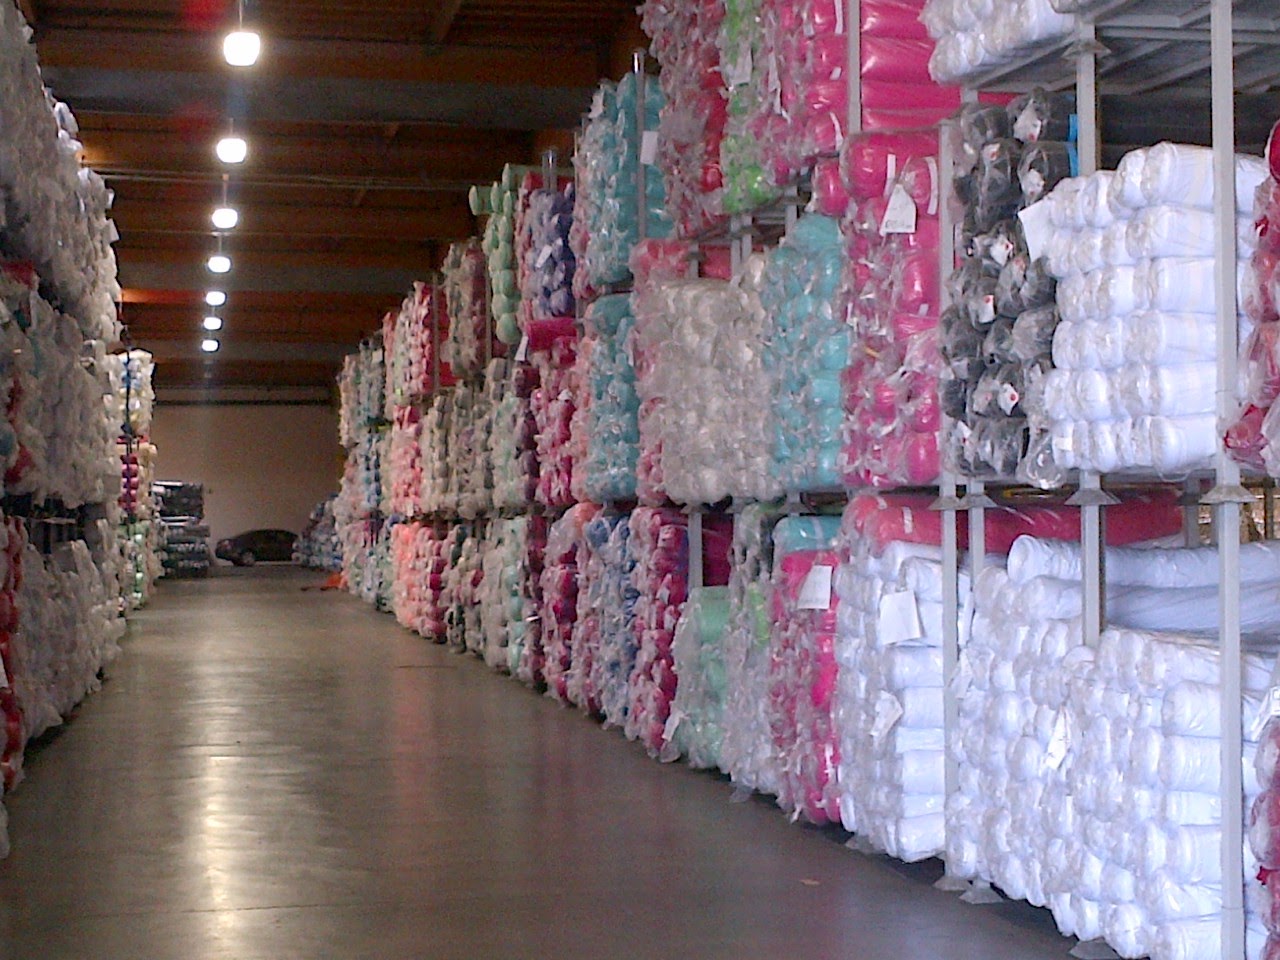 How to Store and Care for Bulk Fabric